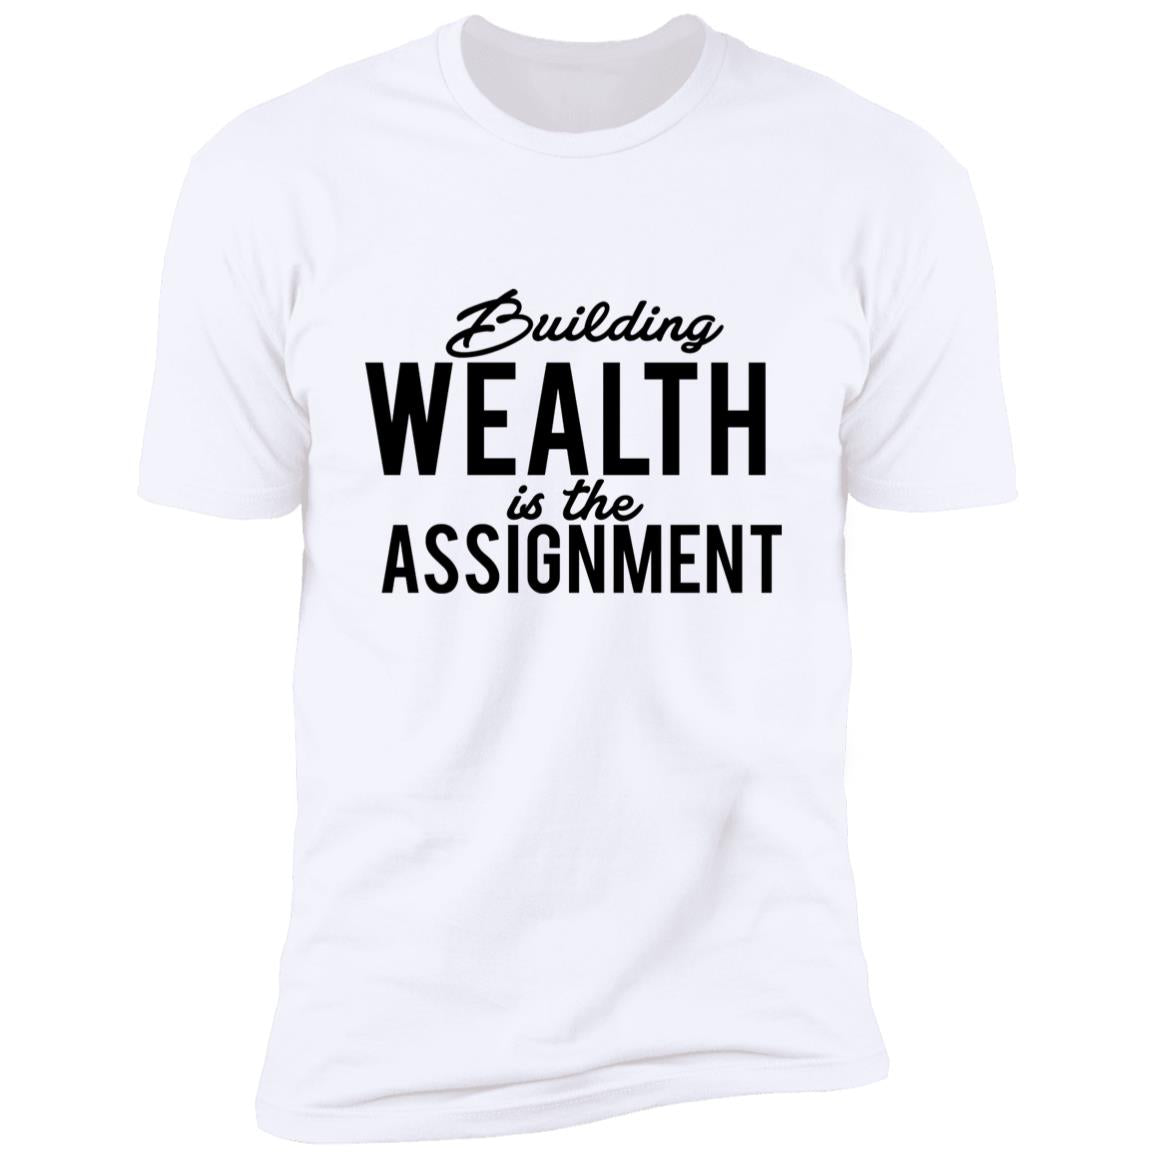 Building Wealth Is The Assignment - Premium Short Sleeve T-Shirt